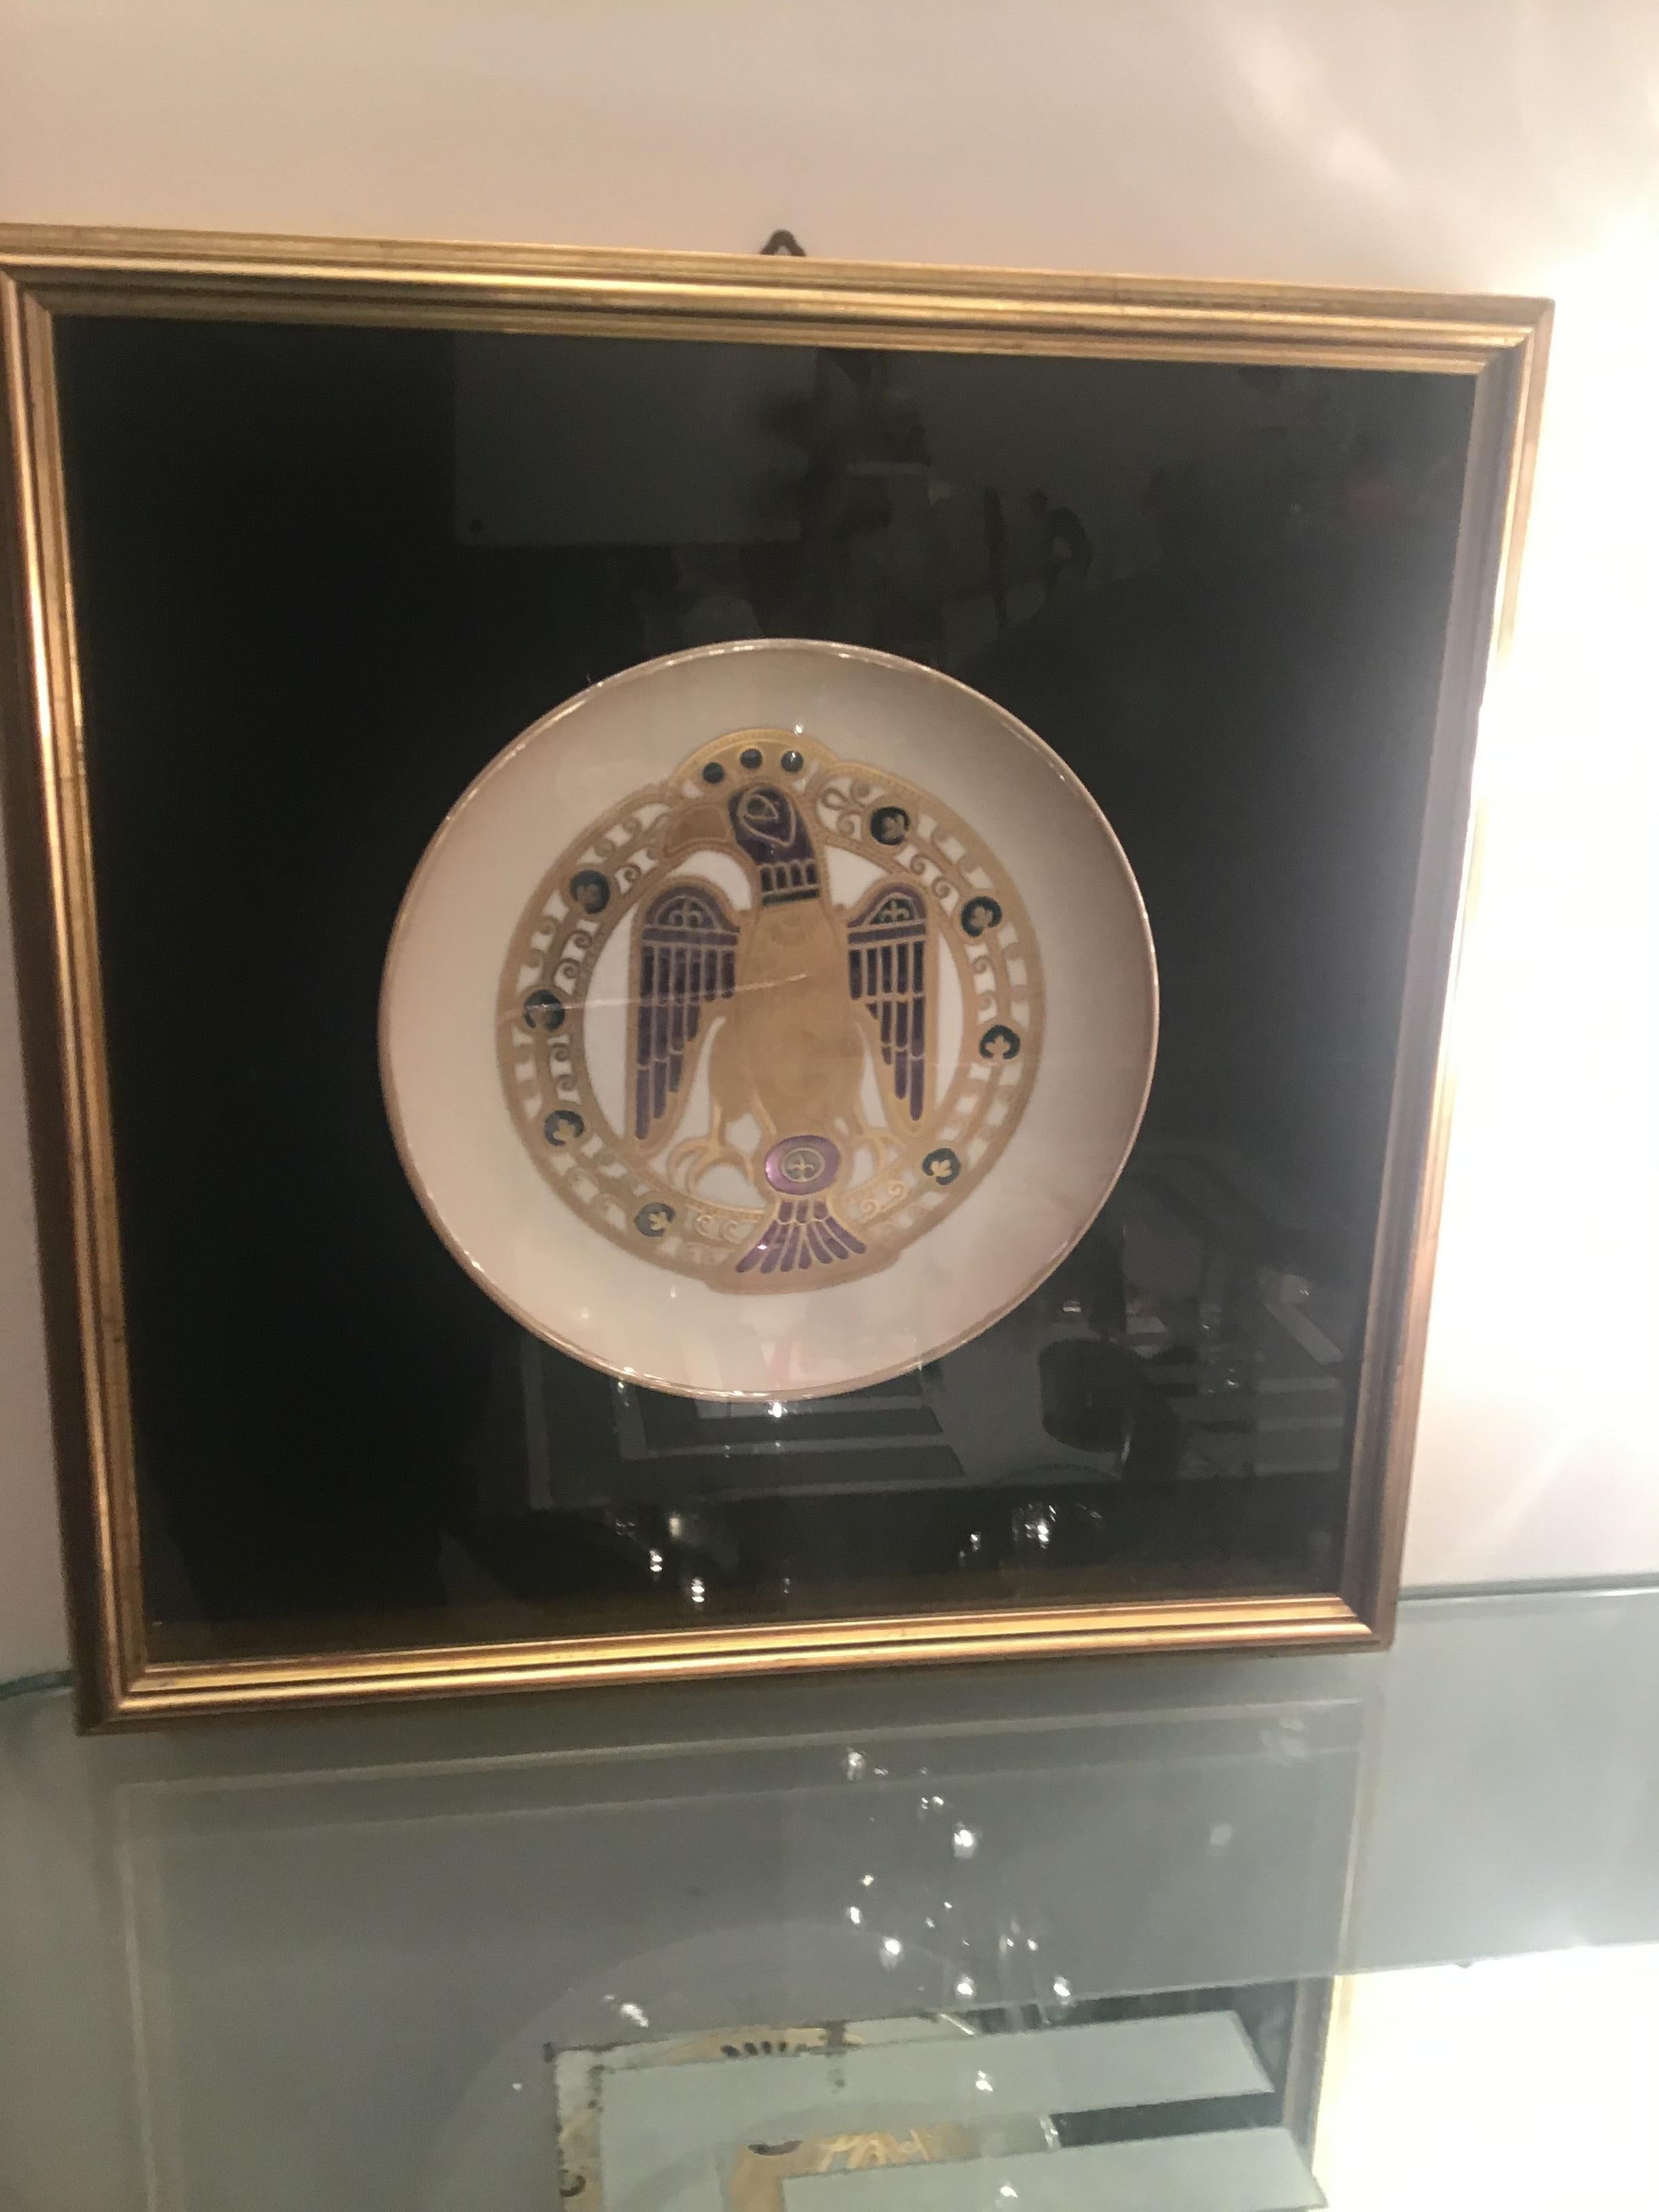 Morbelli Porcelain Wall Plate Worked with Pure Gold 1960 Italy For Sale 5